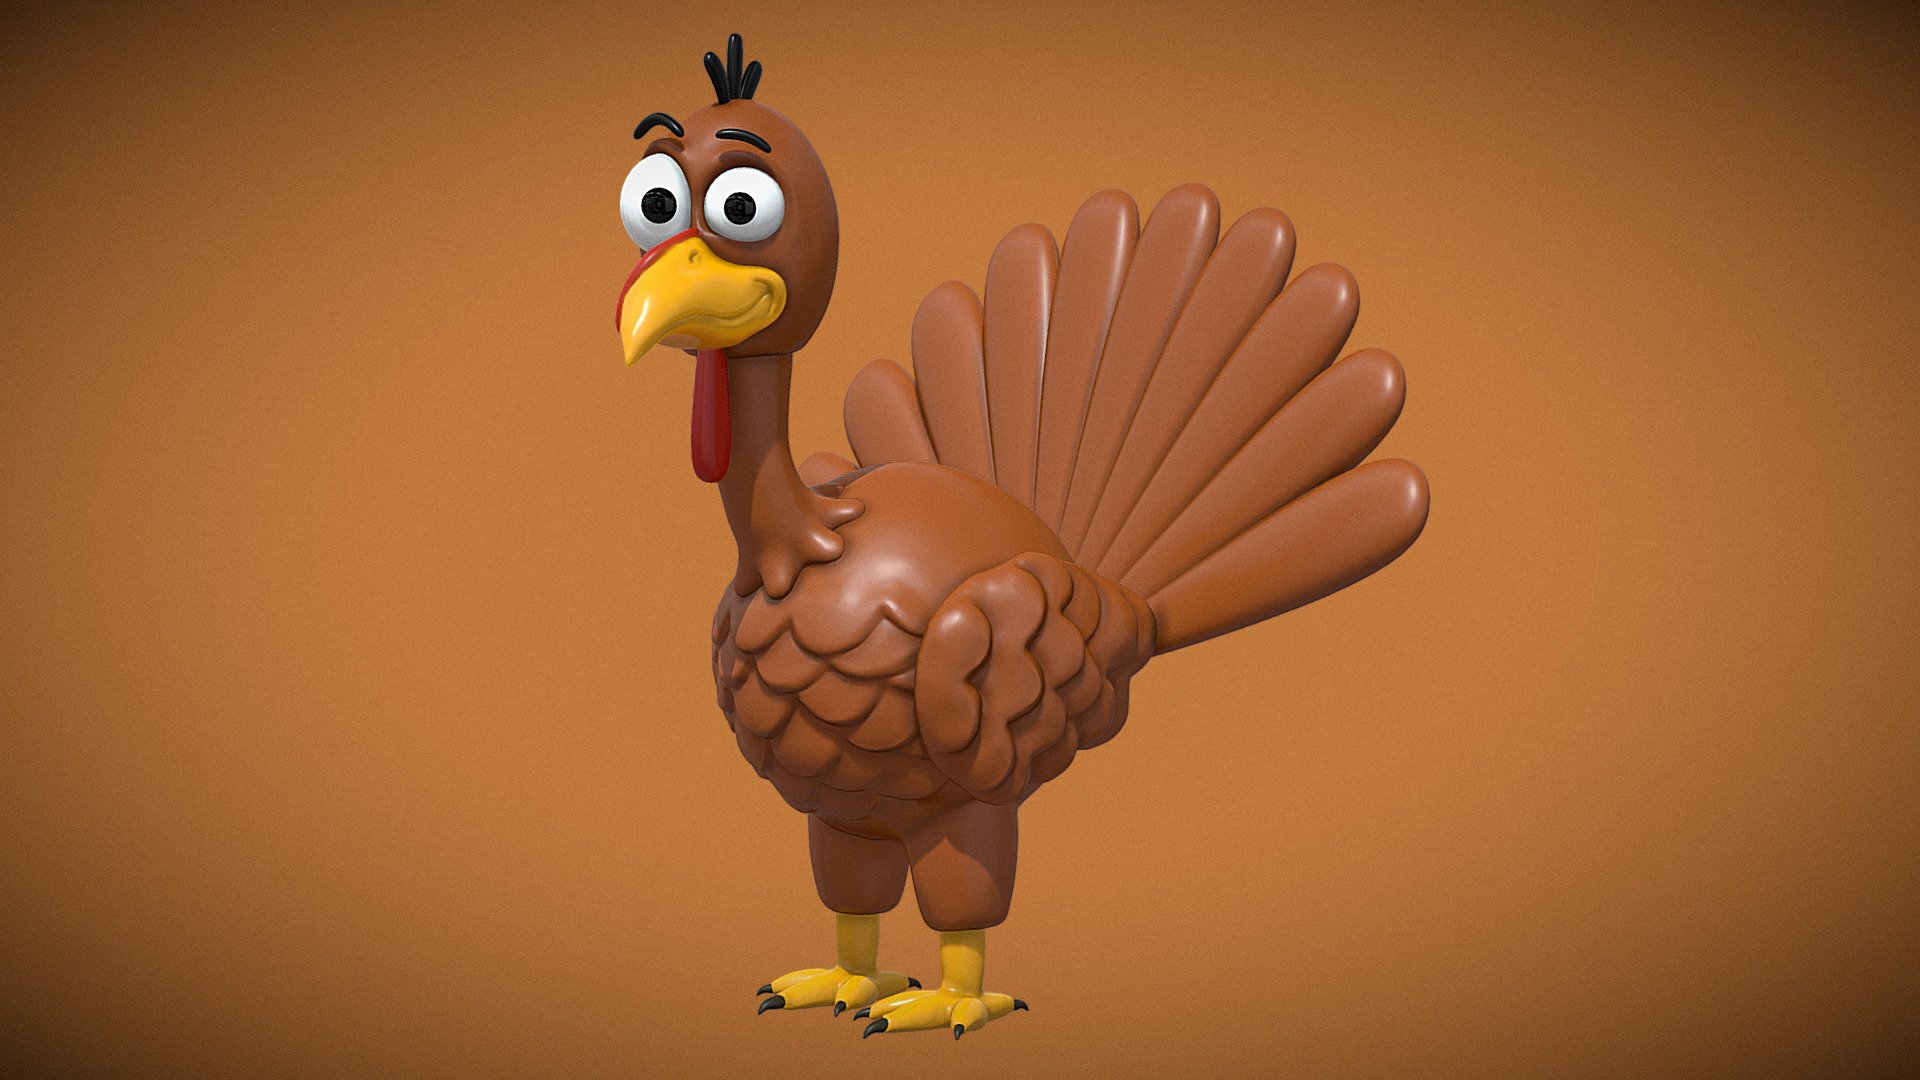 Stylized cartoon Thanksgiving Turkey character, sculpted and created in Blender.

**Note: ** The character has not been retopologized, rigged, or texture baked.

Watch the tutorial on how to create this here:  https://youtu.be/N0XOib-iIzA

Happy Thanksgiving Everyone!  🦃  🥧  🍁  🥂

Contents:




Finished Blender File

Final Render

HDRI Lighting

 - Thanksgiving Turkey 🦃 - Buy Royalty Free 3D model by Ryan King Art (@ryankingart) 3d model